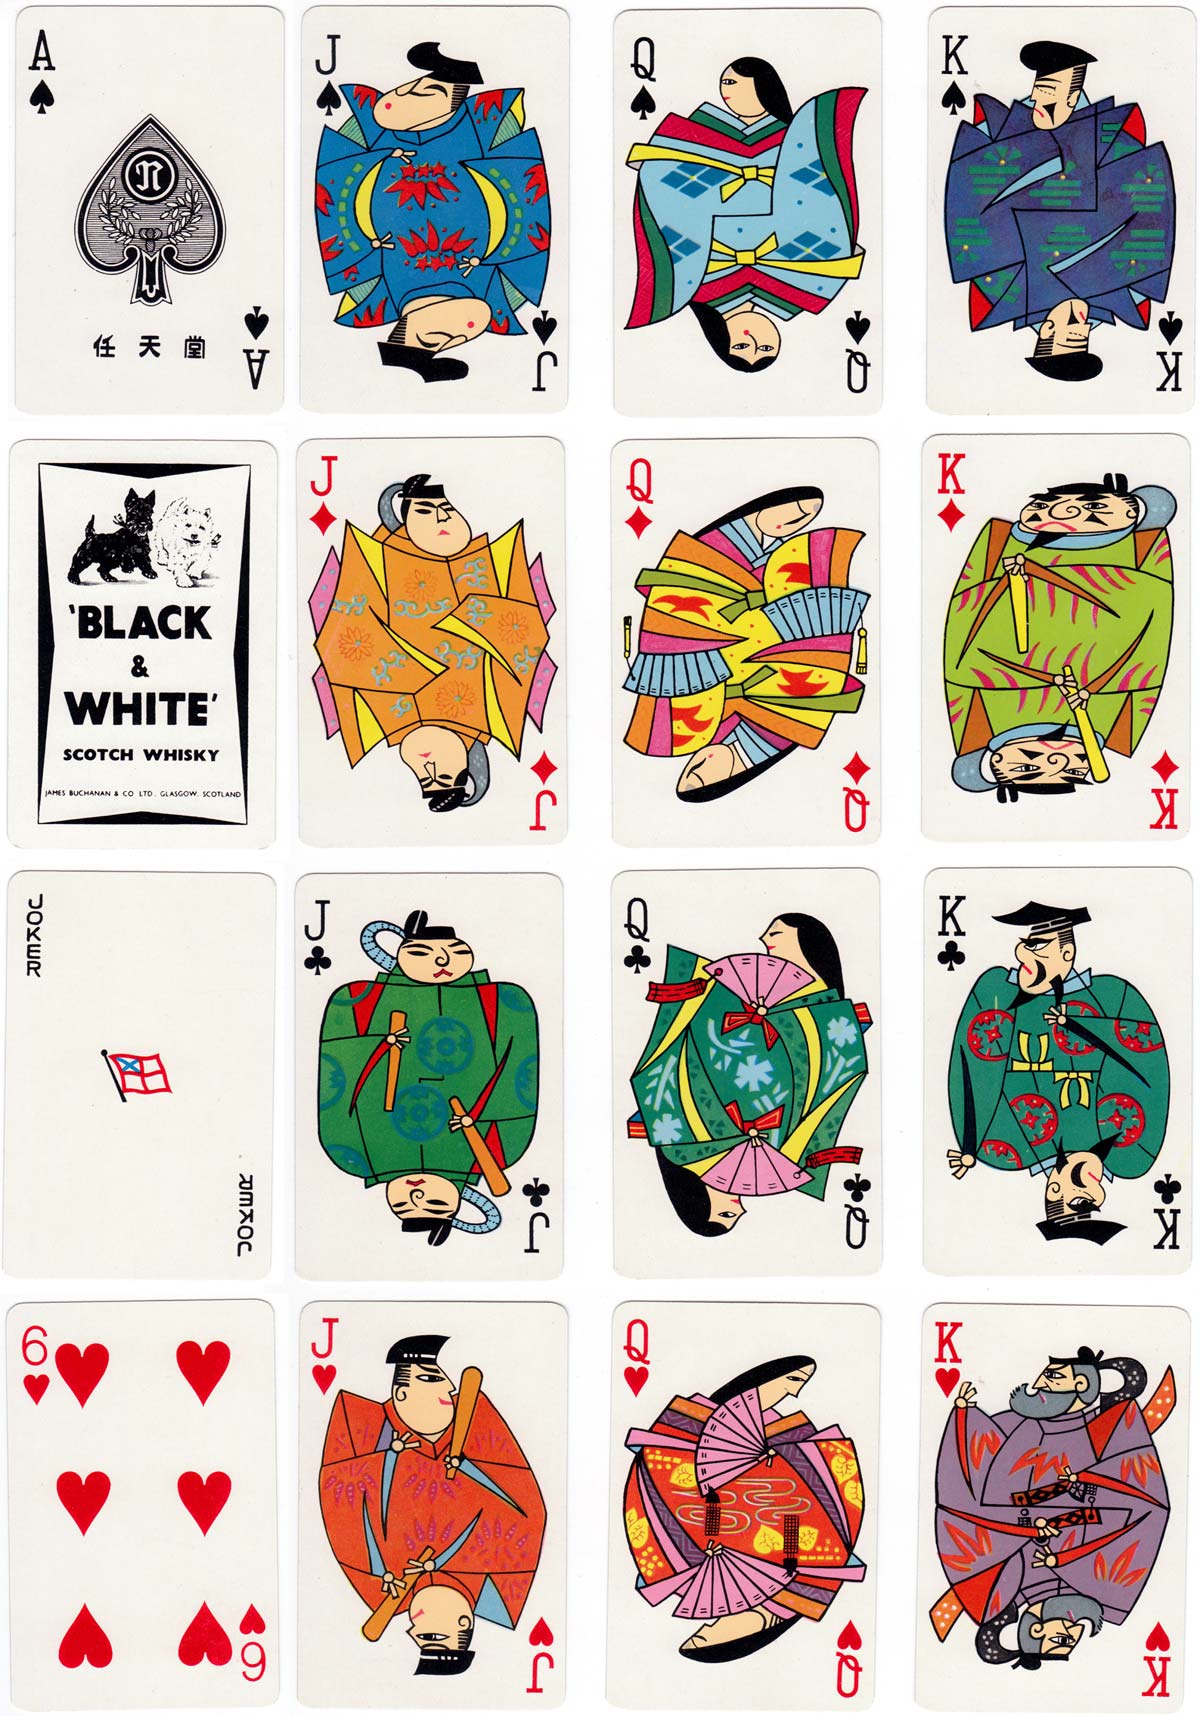 ‘Black & White’ Whisky advertising playing cards manufactured by Nintendo Playing Cards Co Ltd for Dodwell & Co